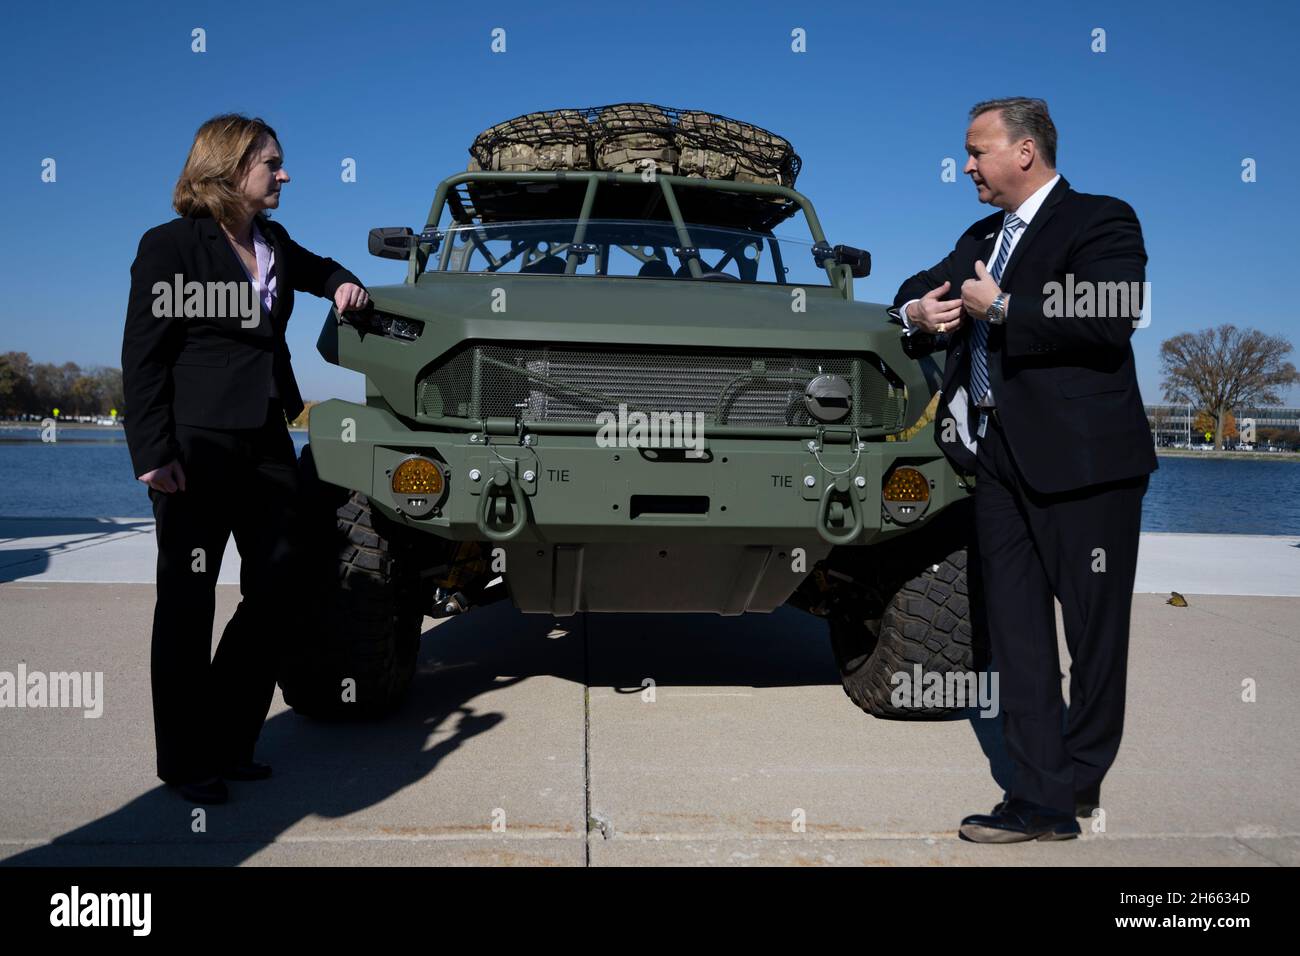 Warren, United States of America. 08 November, 2021. U.S. Deputy Secretary of Defense Kathleen H. Hicks, left, speaks with Stephen duMont, President, GM Defense while viewing the military prototype electric Light Reconnaissance Vehicle at the GM Technical Center, November 8, 2021 in Warren, Michigan.  Credit: Chad McNeeley/DOD photo/Alamy Live News Stock Photo